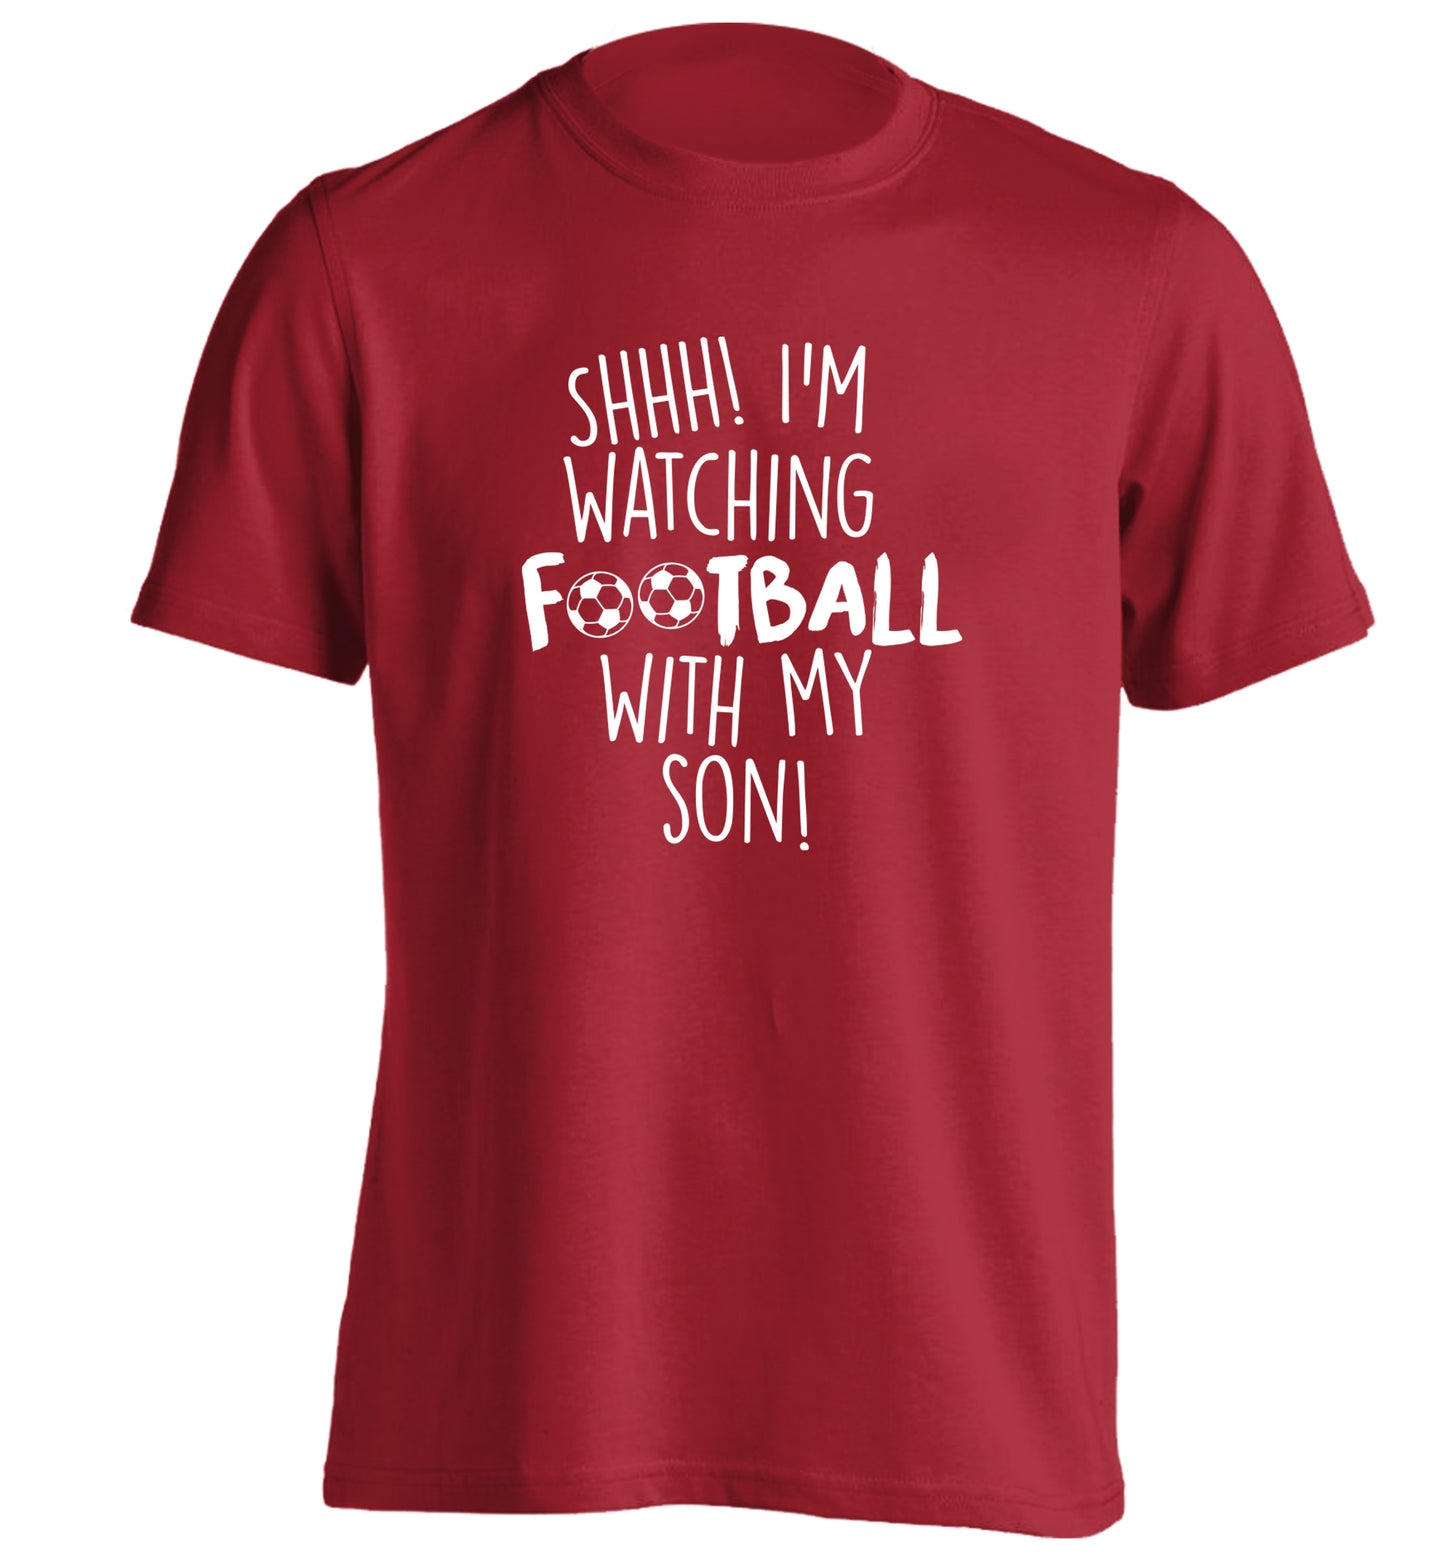 Shhh I'm watching football with my son adults unisexred Tshirt 2XL